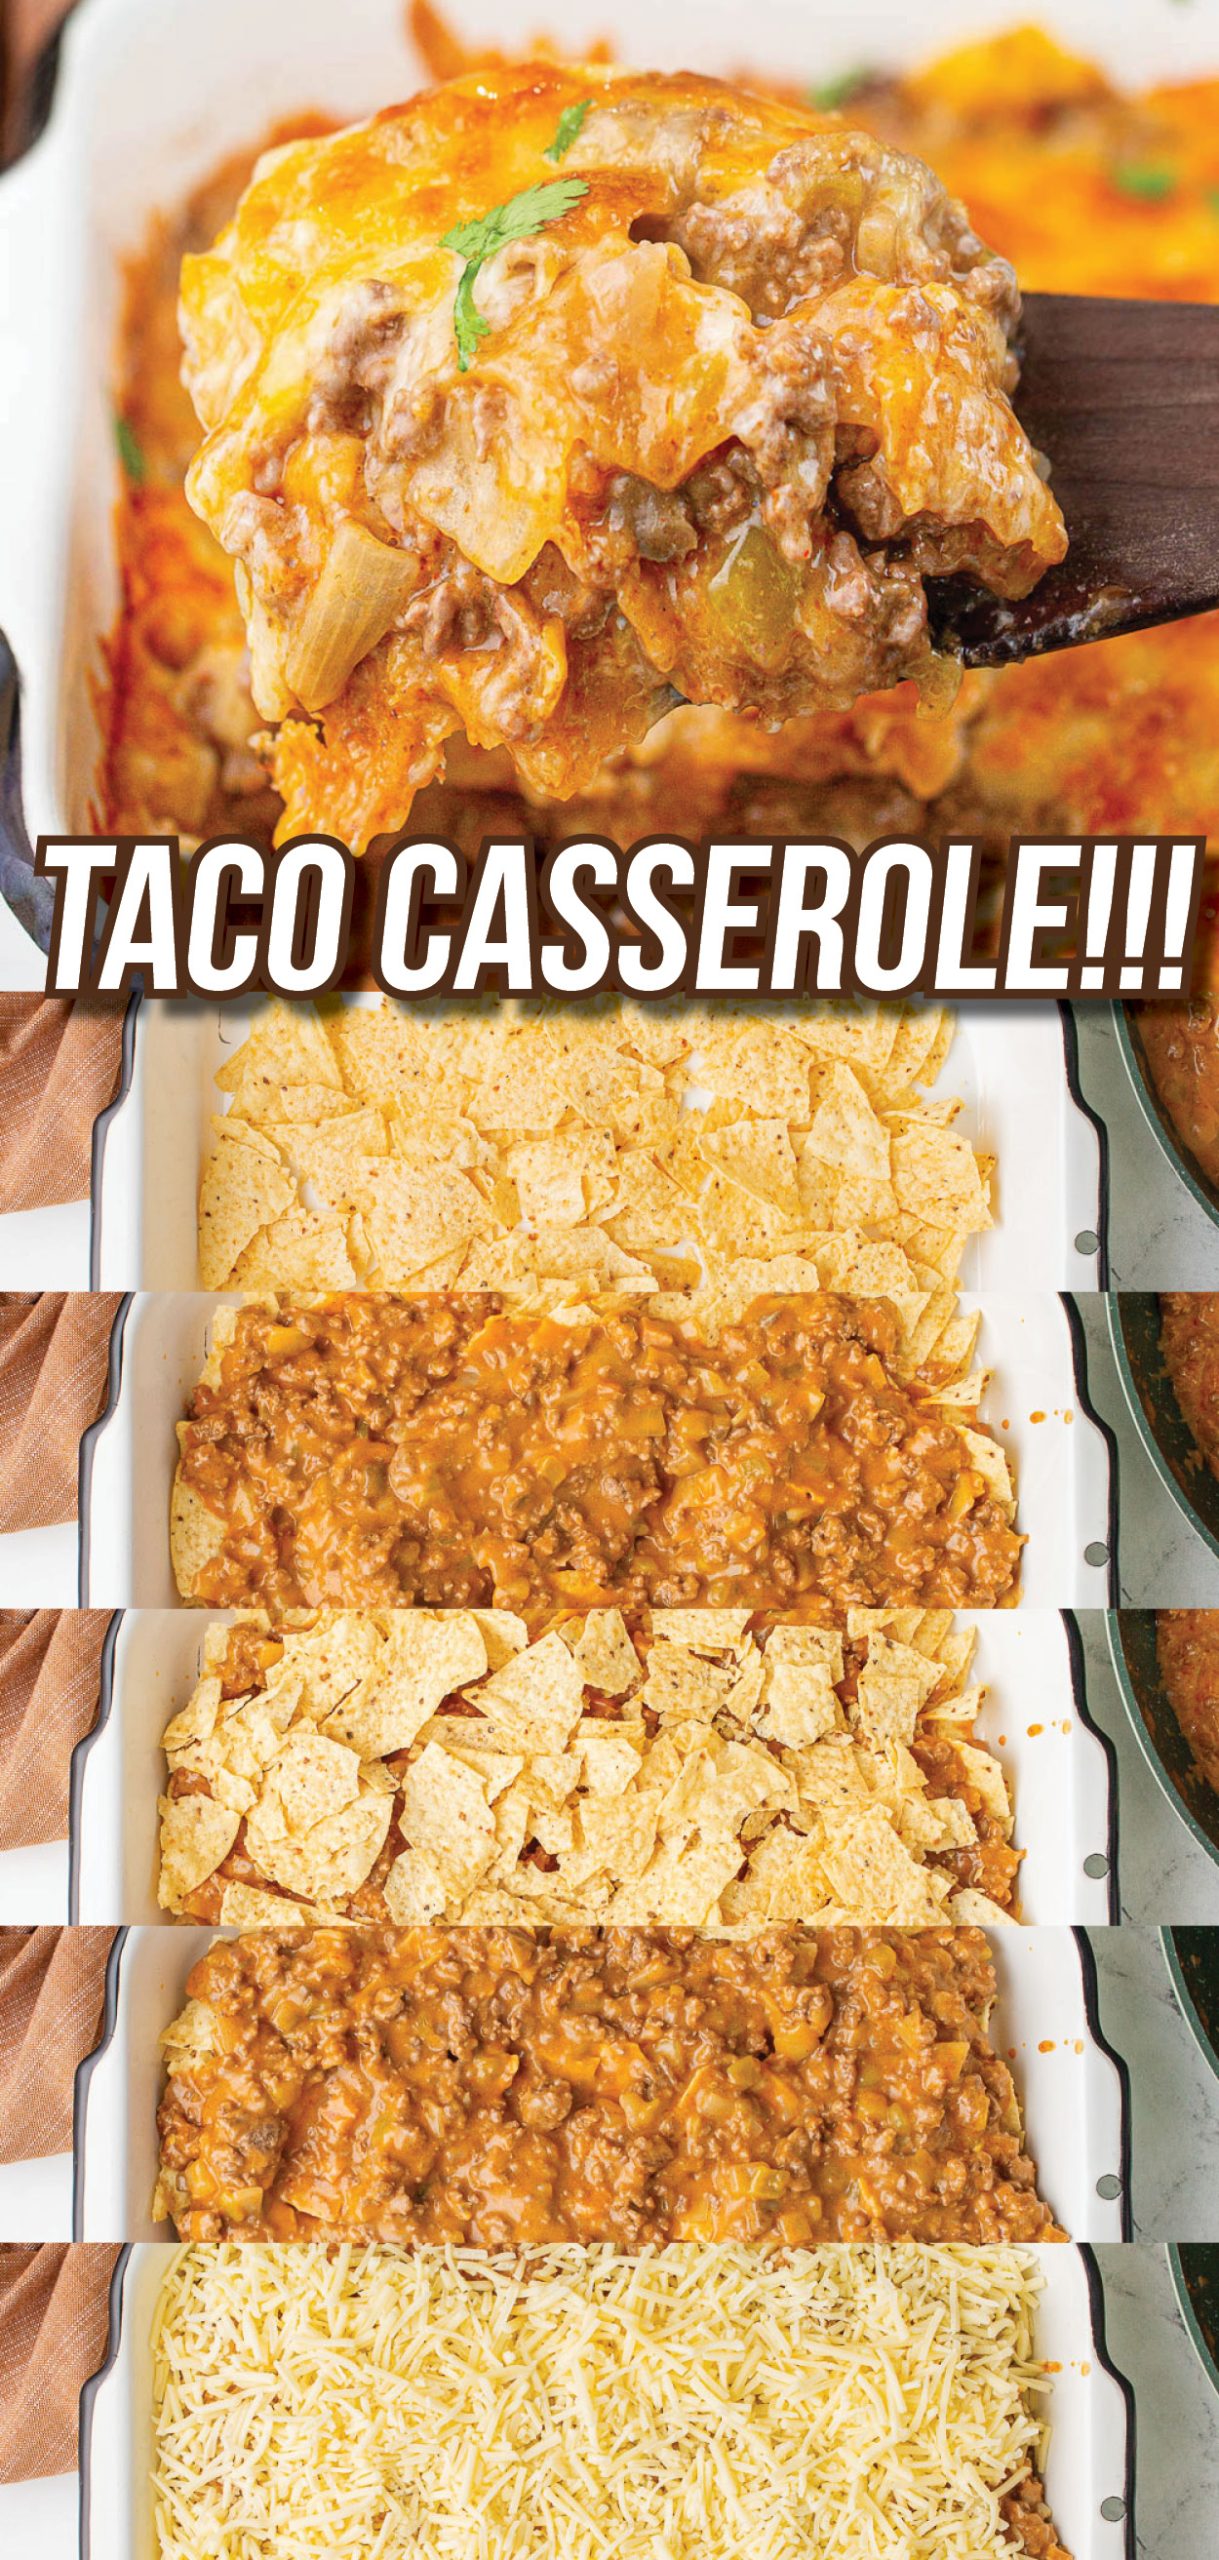 Taco Casserole has everything you love about delicious tacos layered into one irresistible dish! It’s the ultimate easy comfort food for busy families.